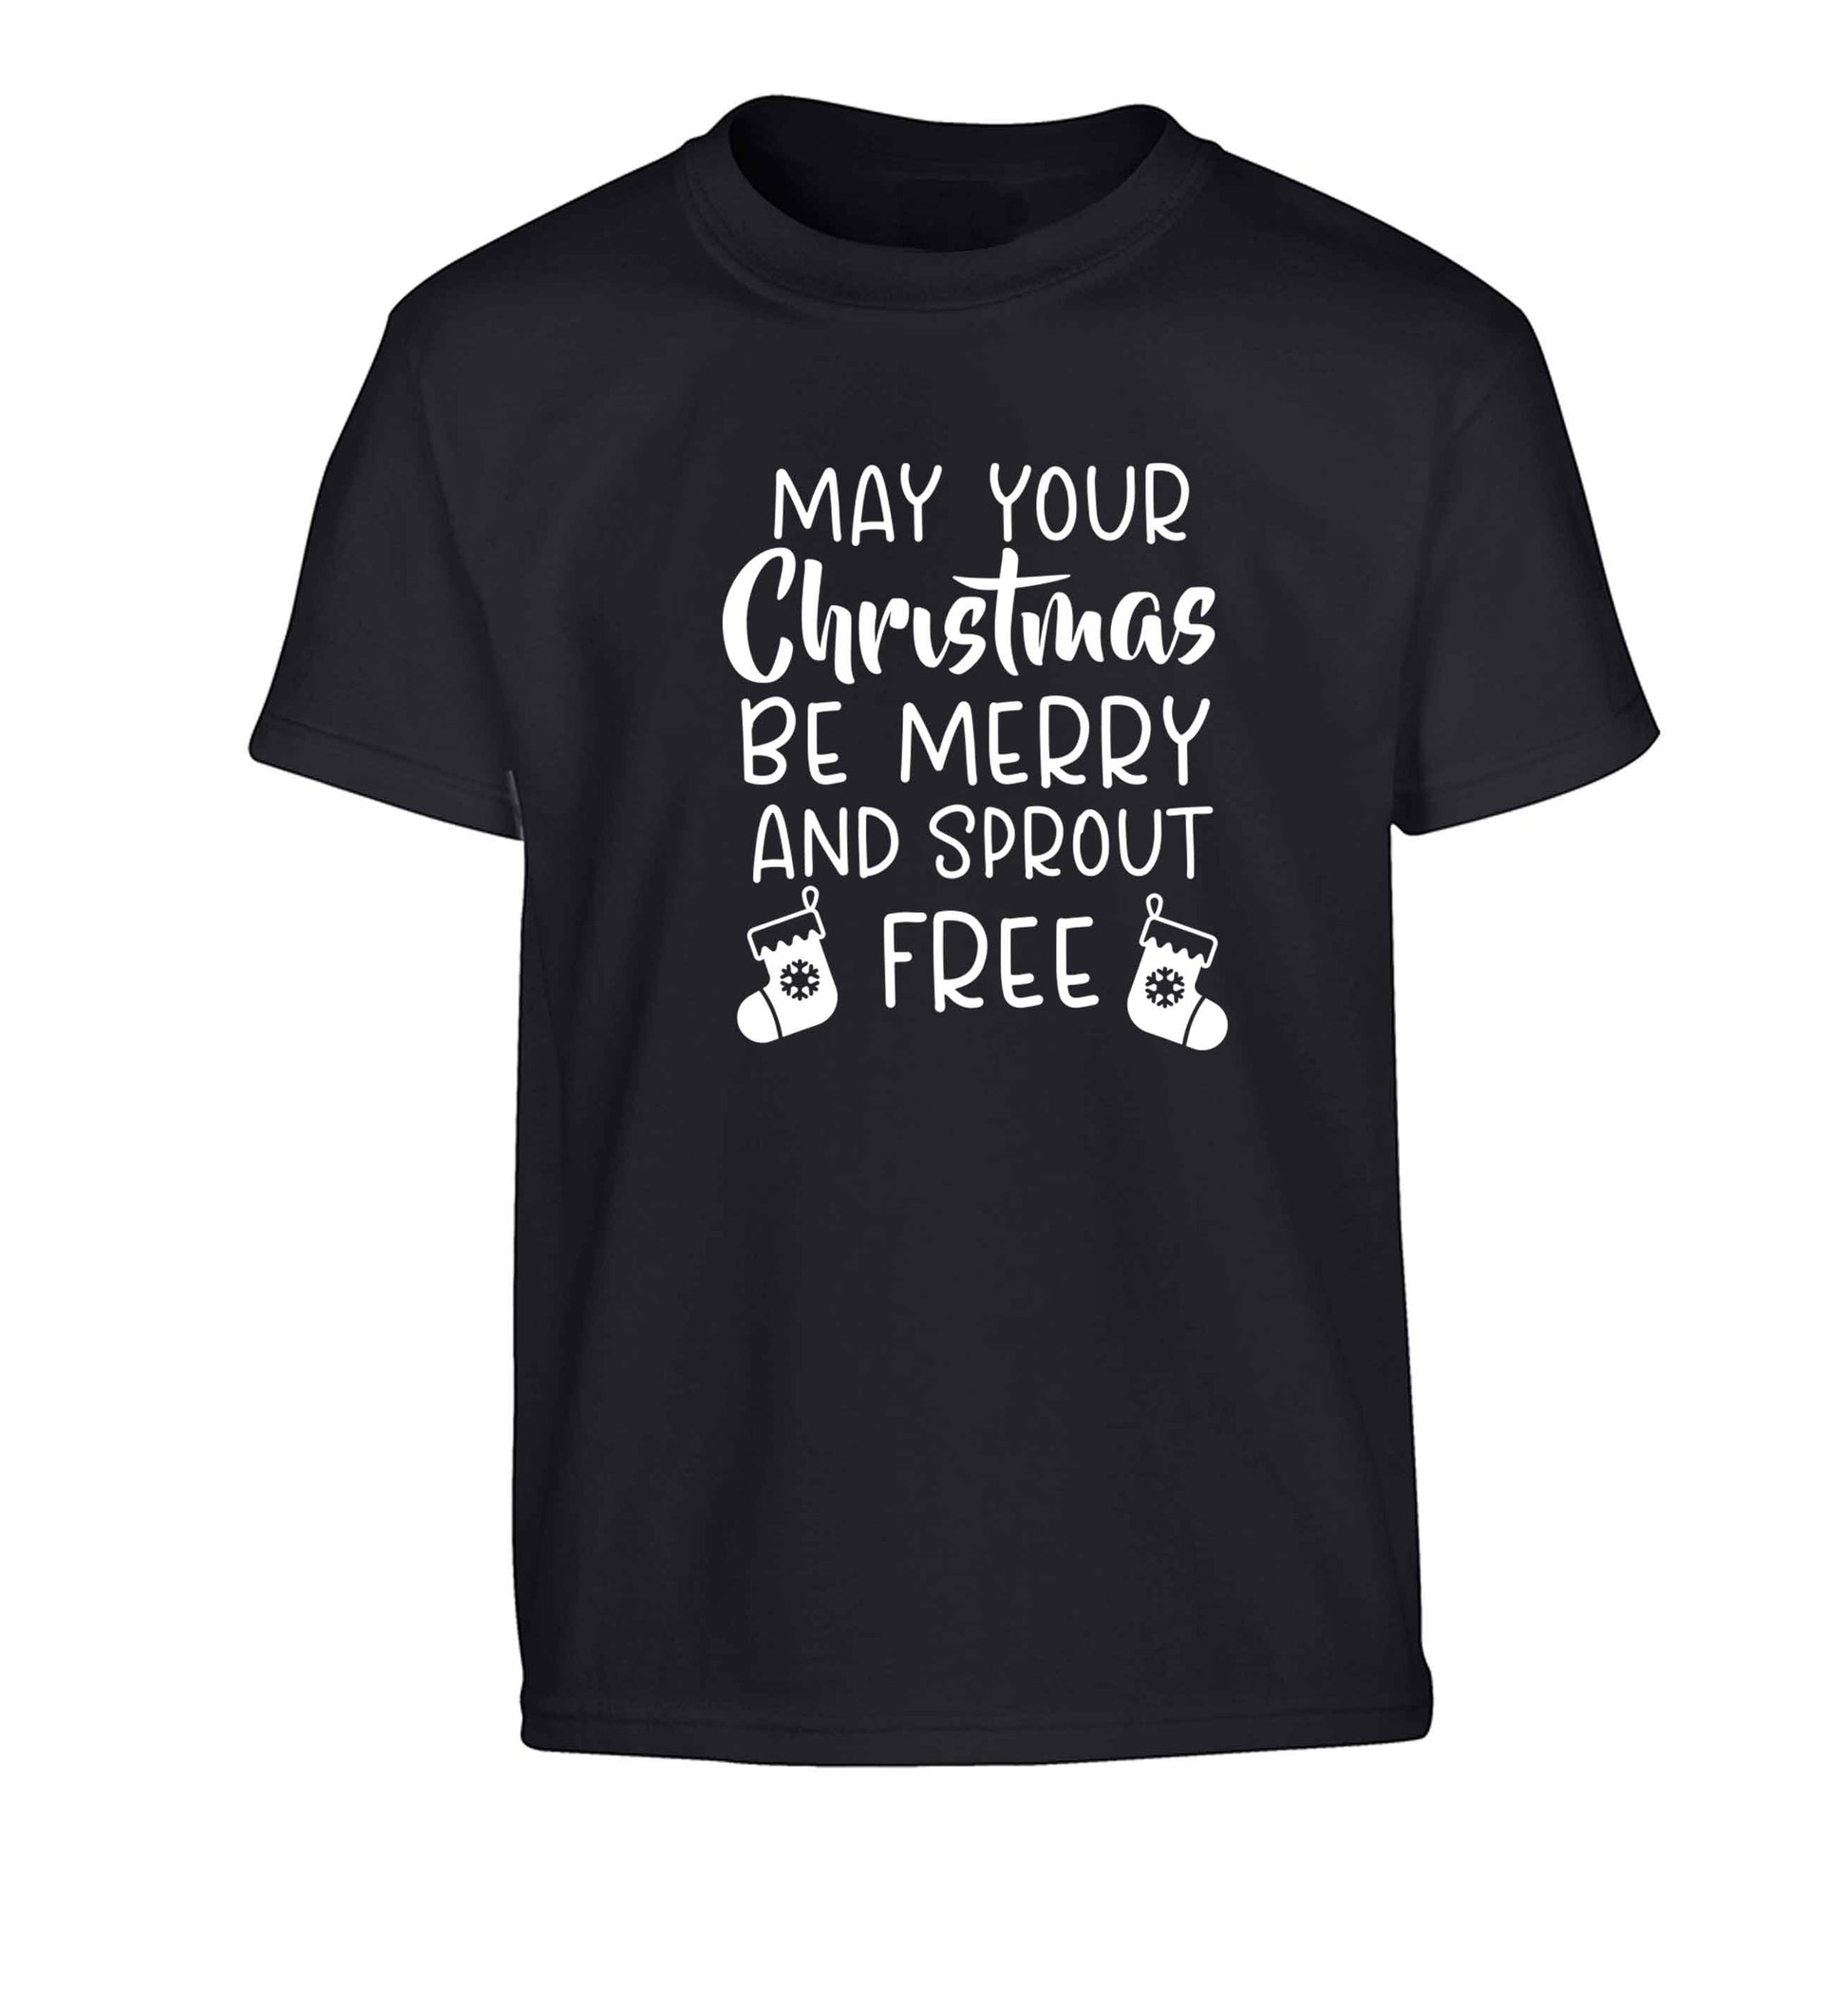 May your Christmas be merry and sprout free Children's black Tshirt 12-13 Years